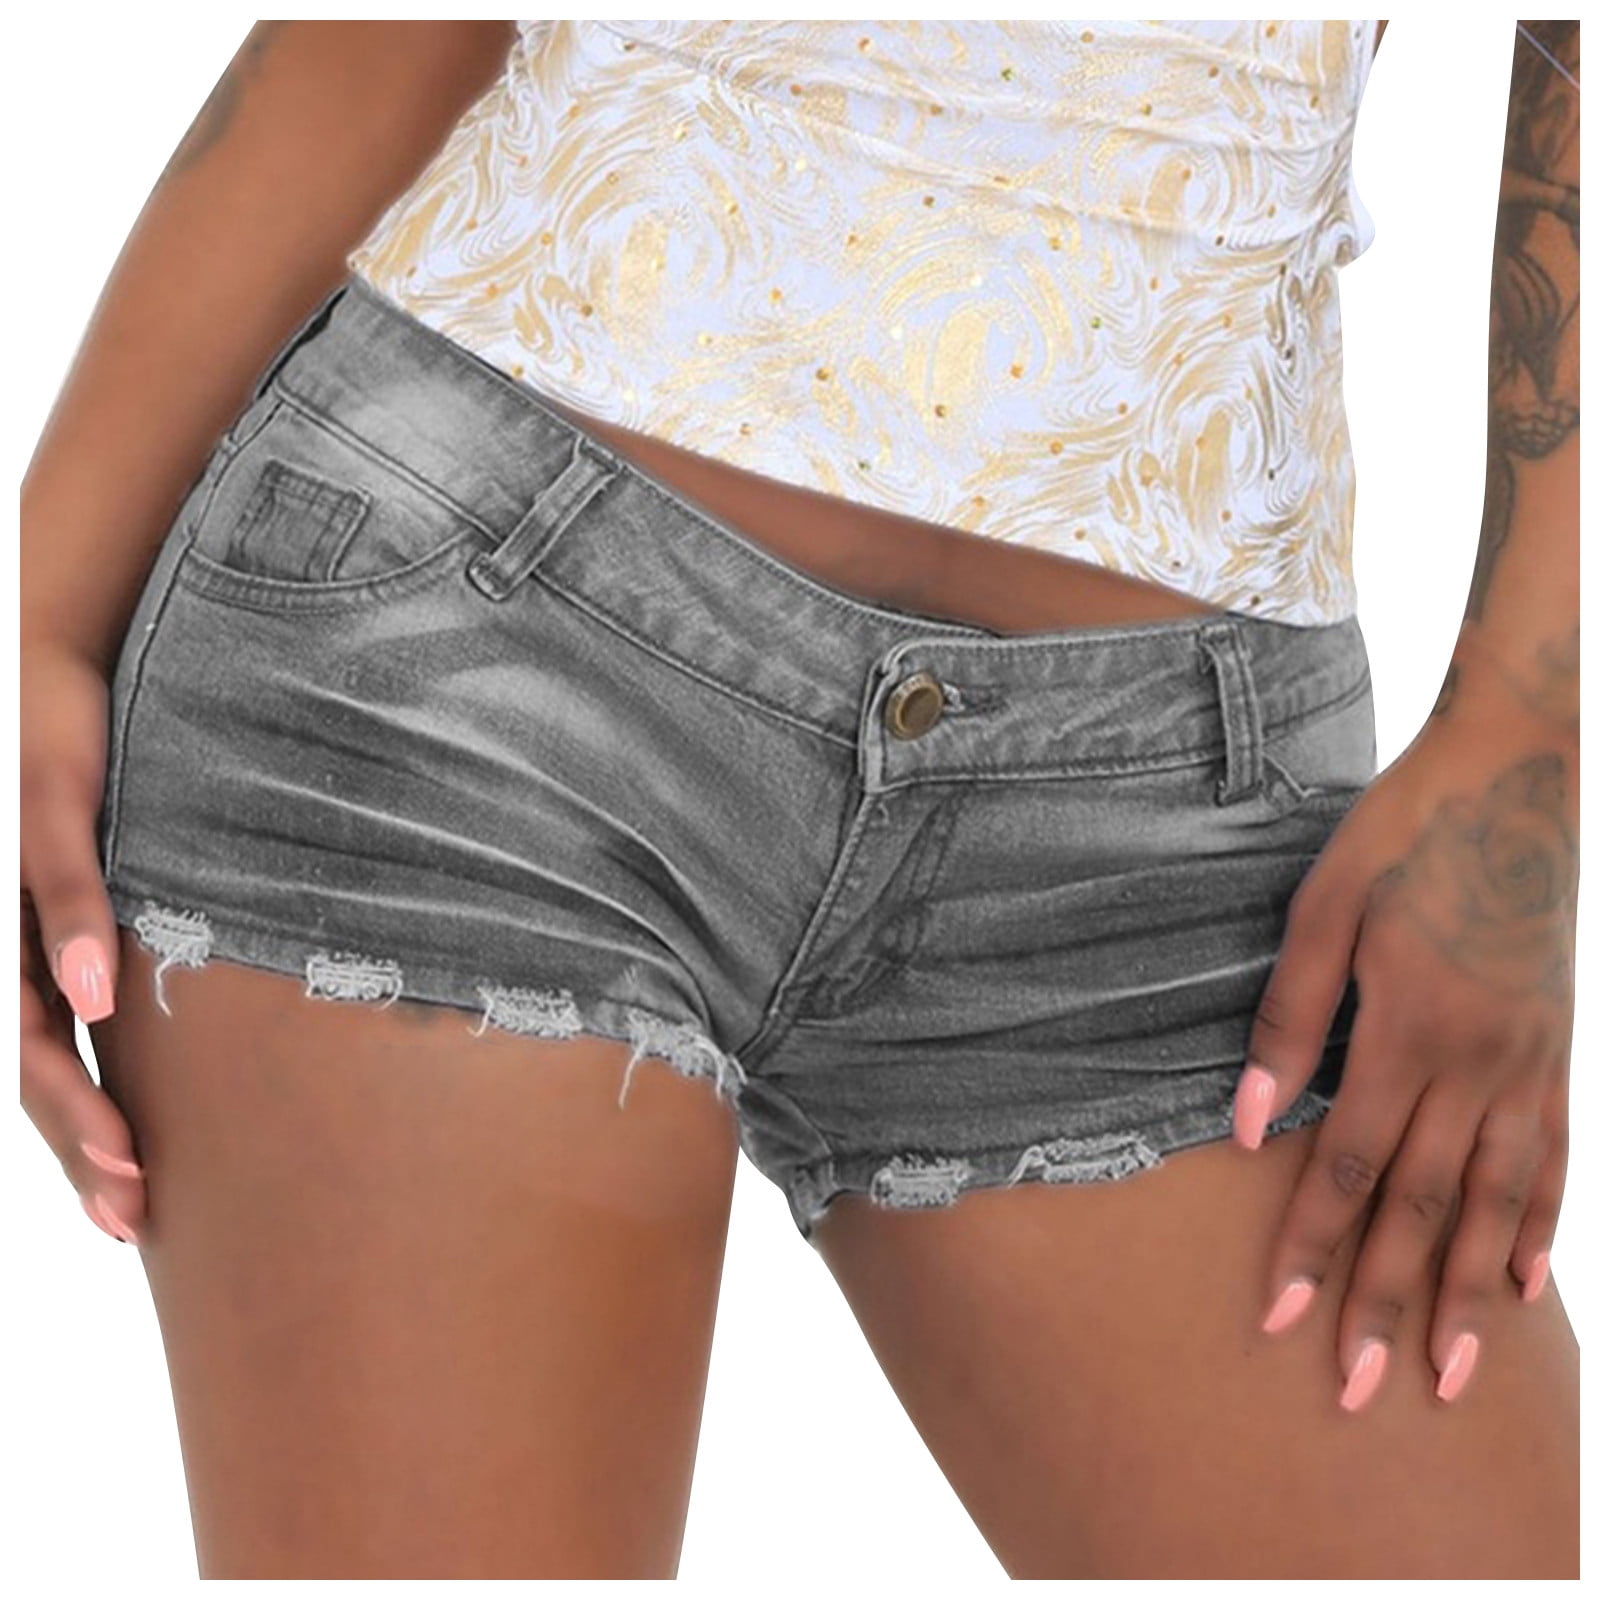 Mortilo Low Waisted Jeans For Women Y2K Fashion Summer Women's Casual Denim  Shorts Frayed Hem Ripped Jeans Hot Shorts